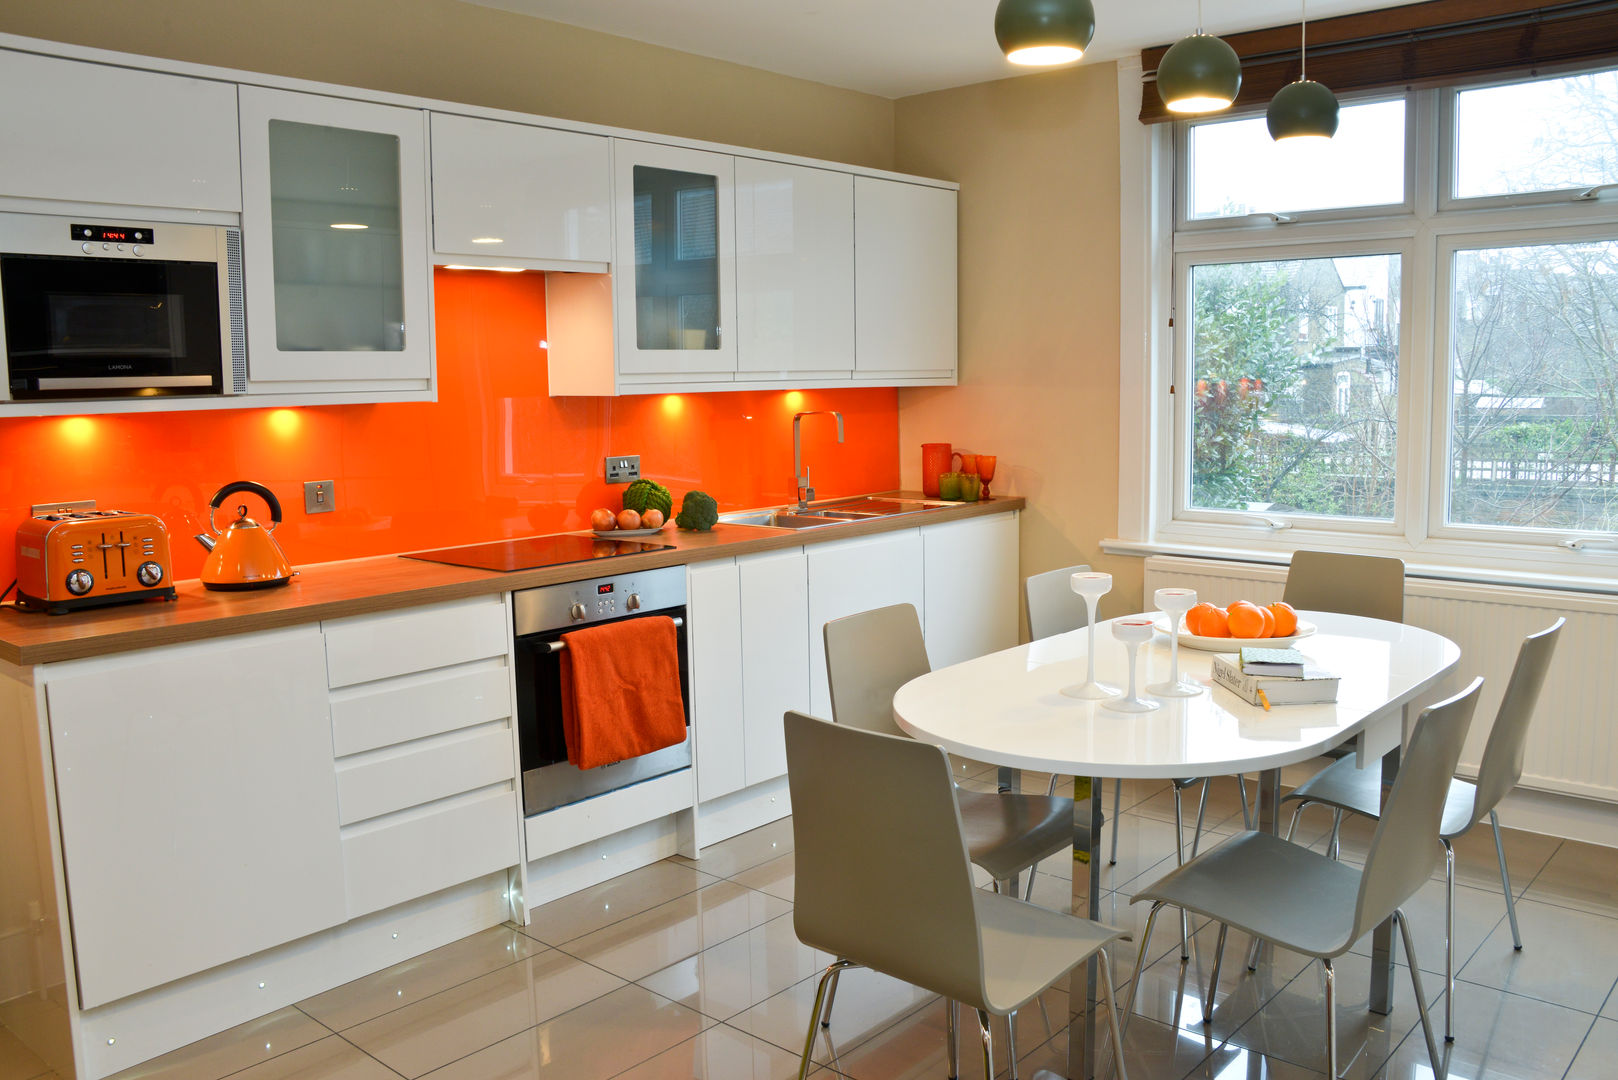 A Bright and Breezy Kitchen, Cathy Phillips & Co Cathy Phillips & Co Cucina moderna